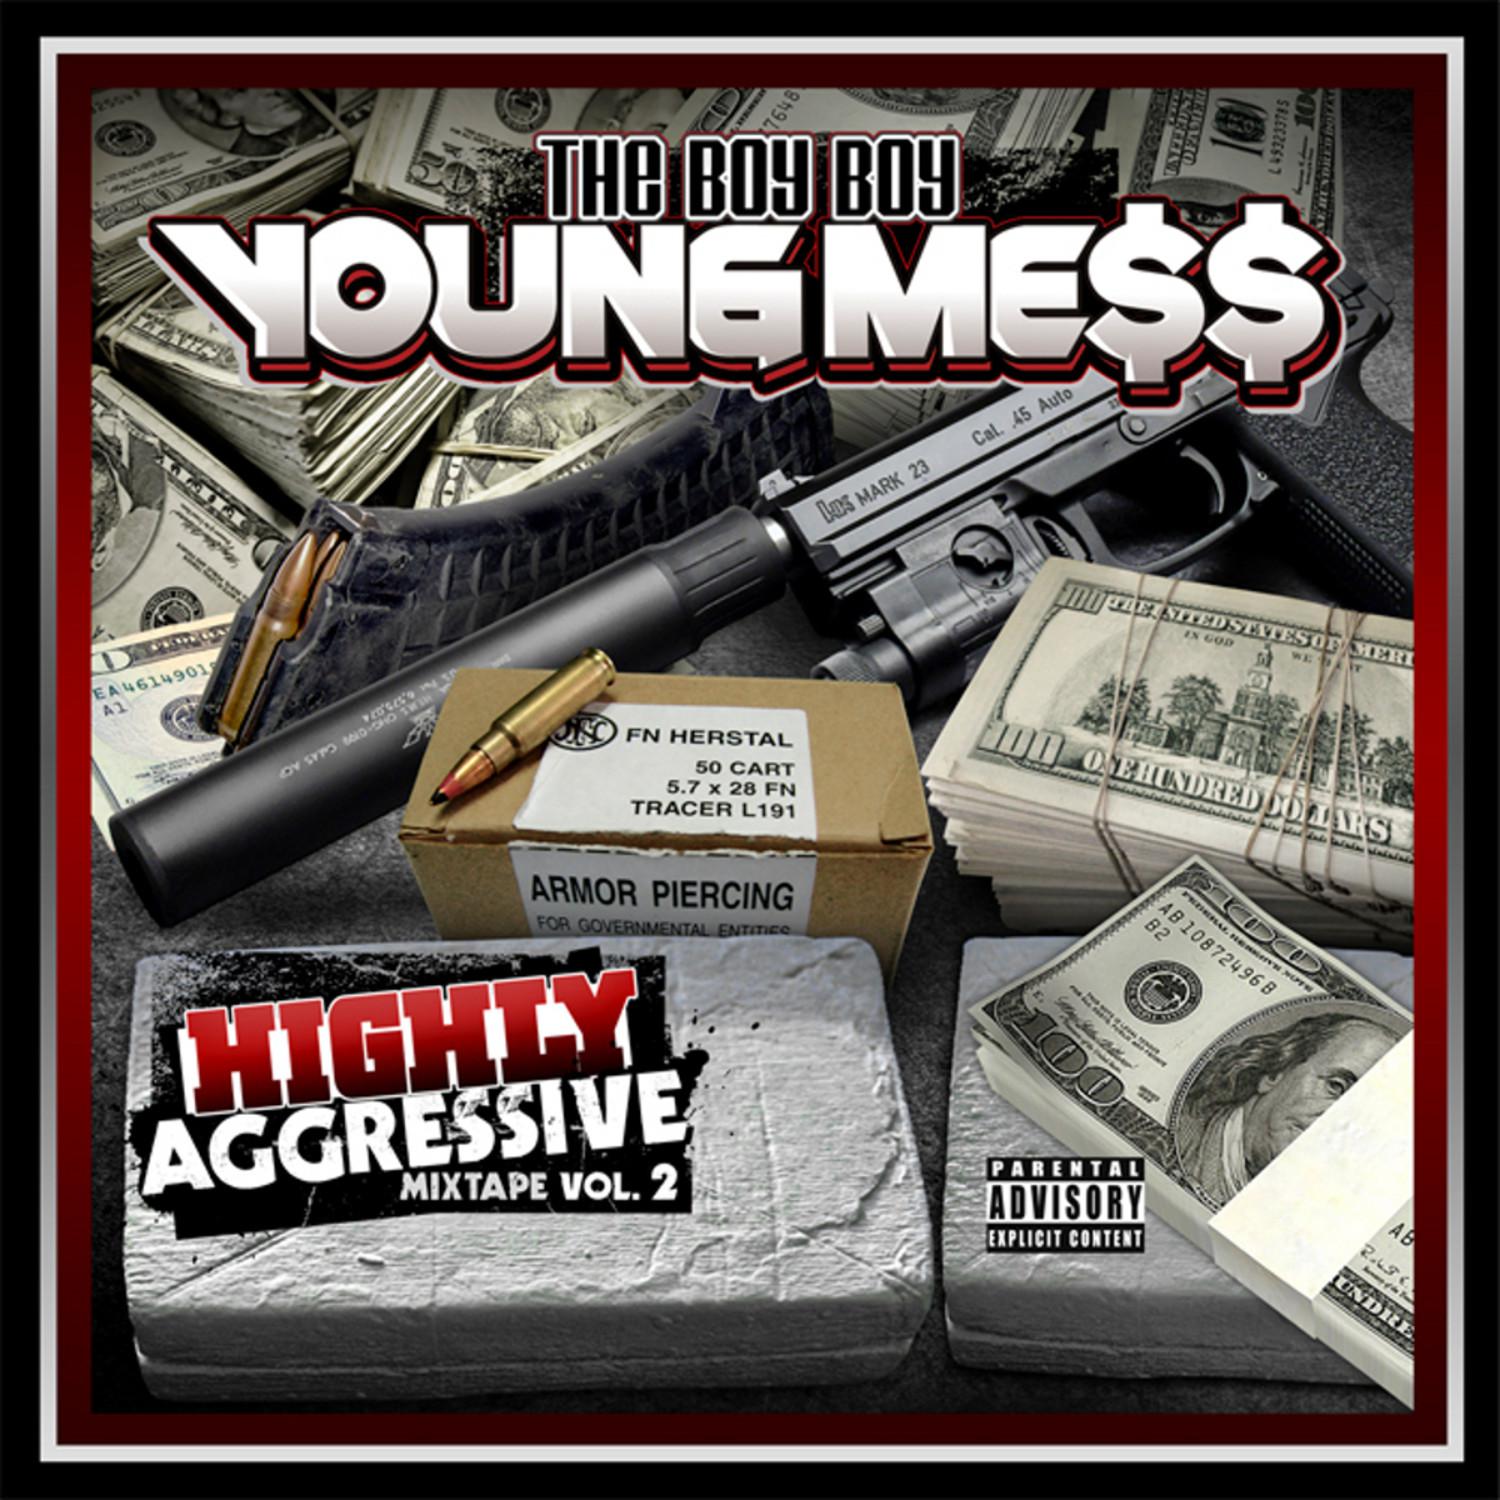 Intro: Highly Aggressive 2